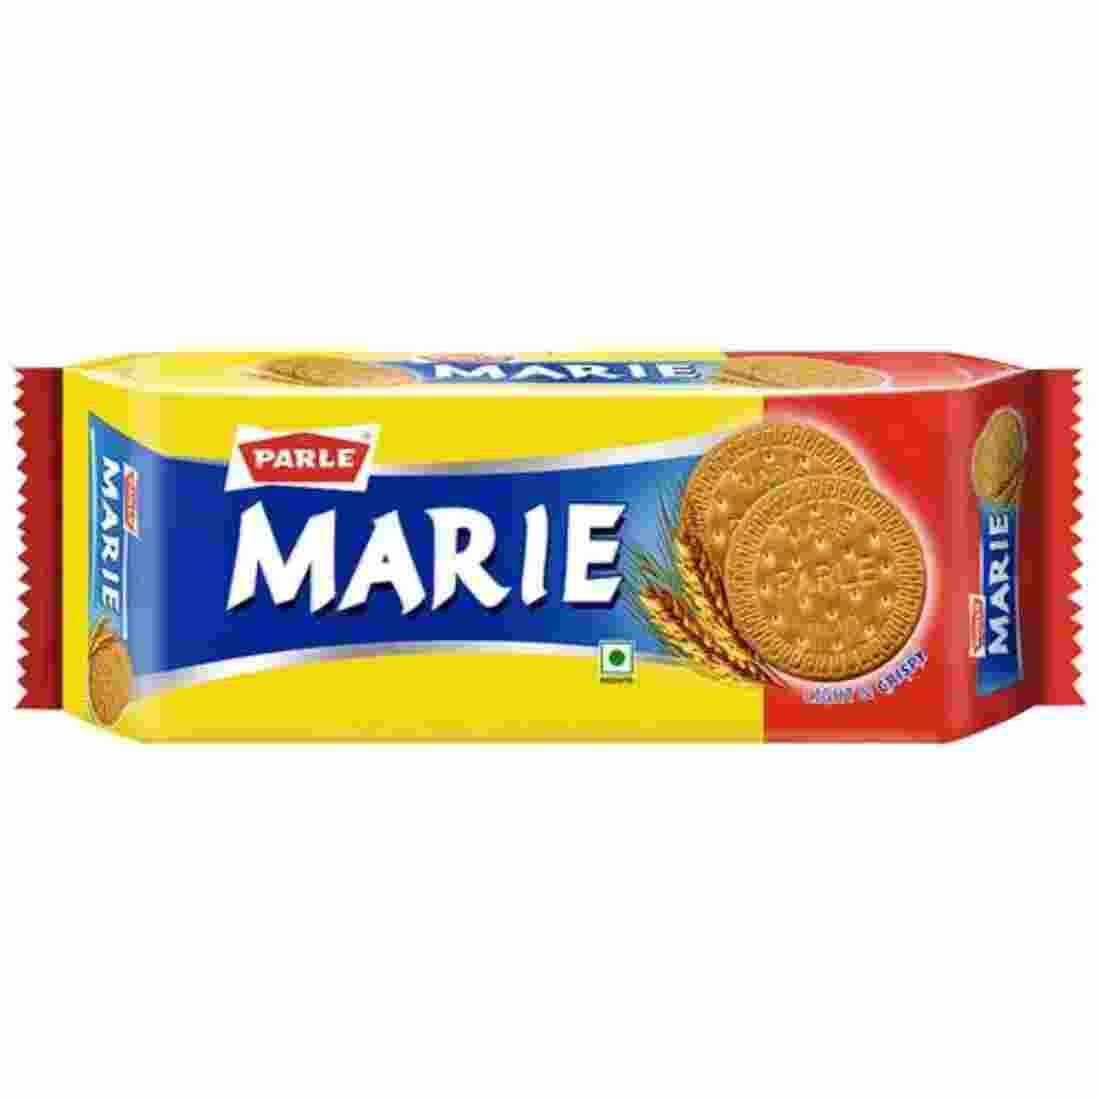 Parle Marie biscuits , 65.8g/ 79.9 g (item weight may vary)